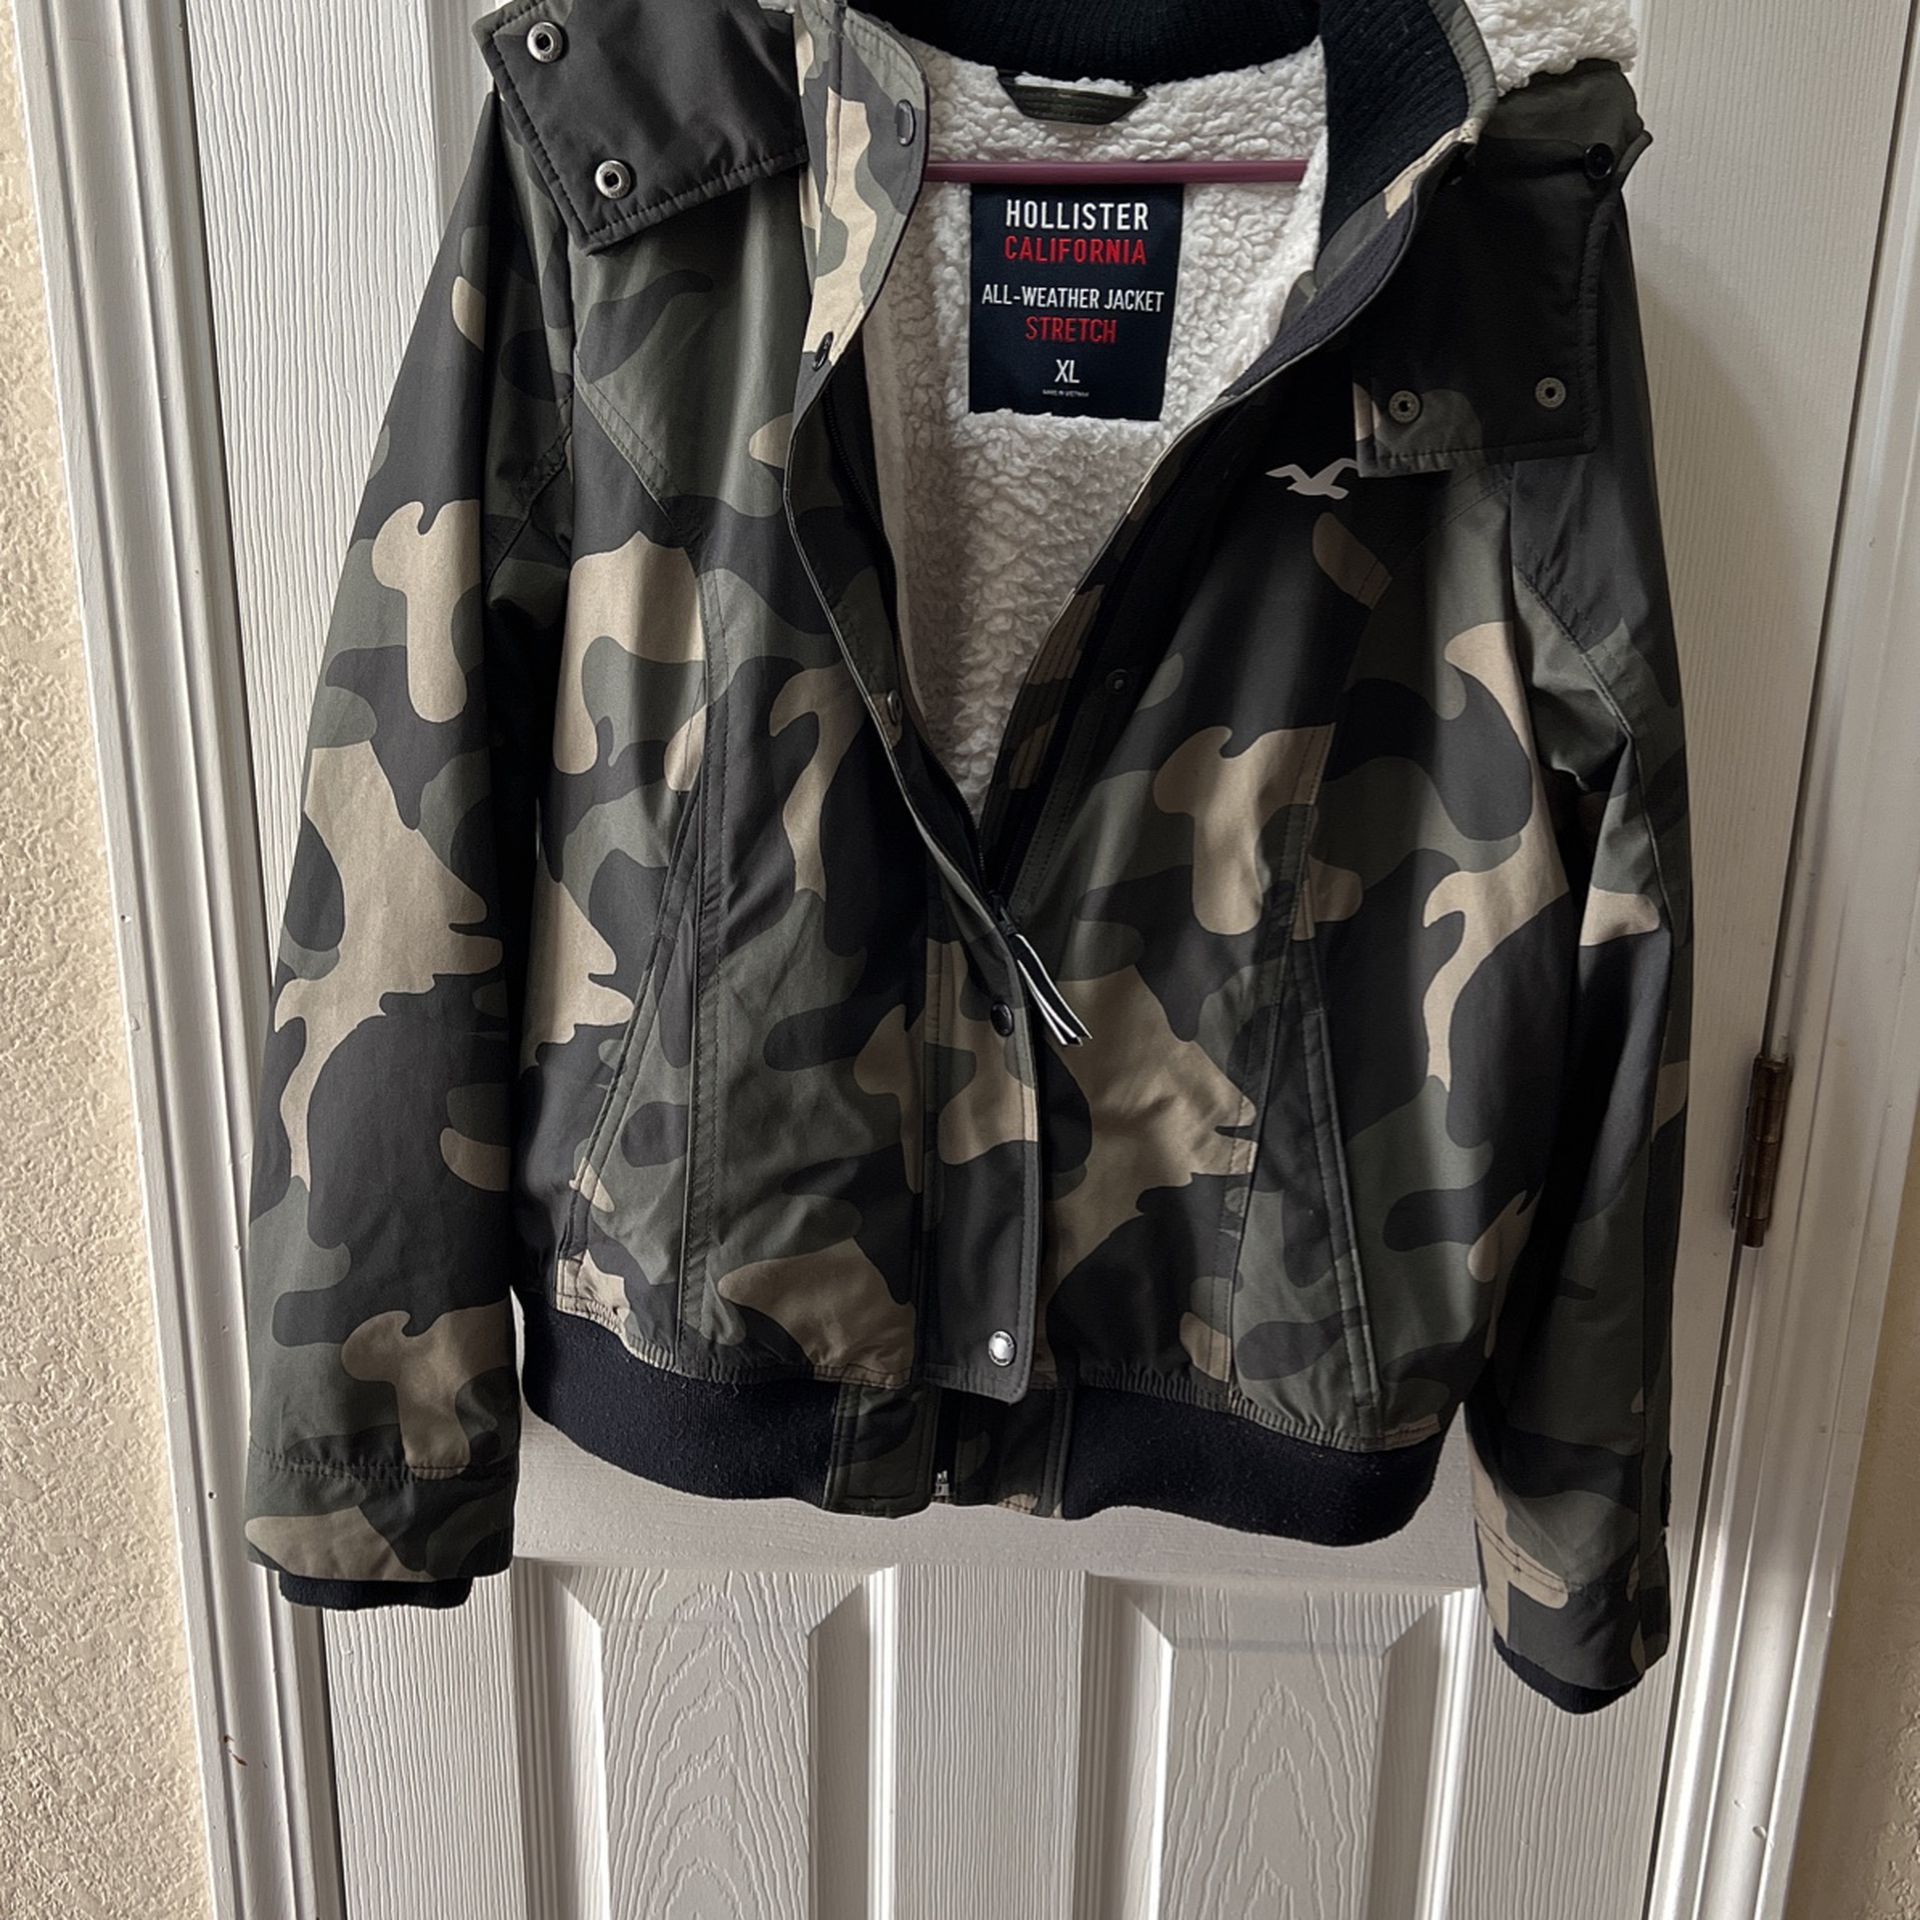 Hollister Army Color jacket